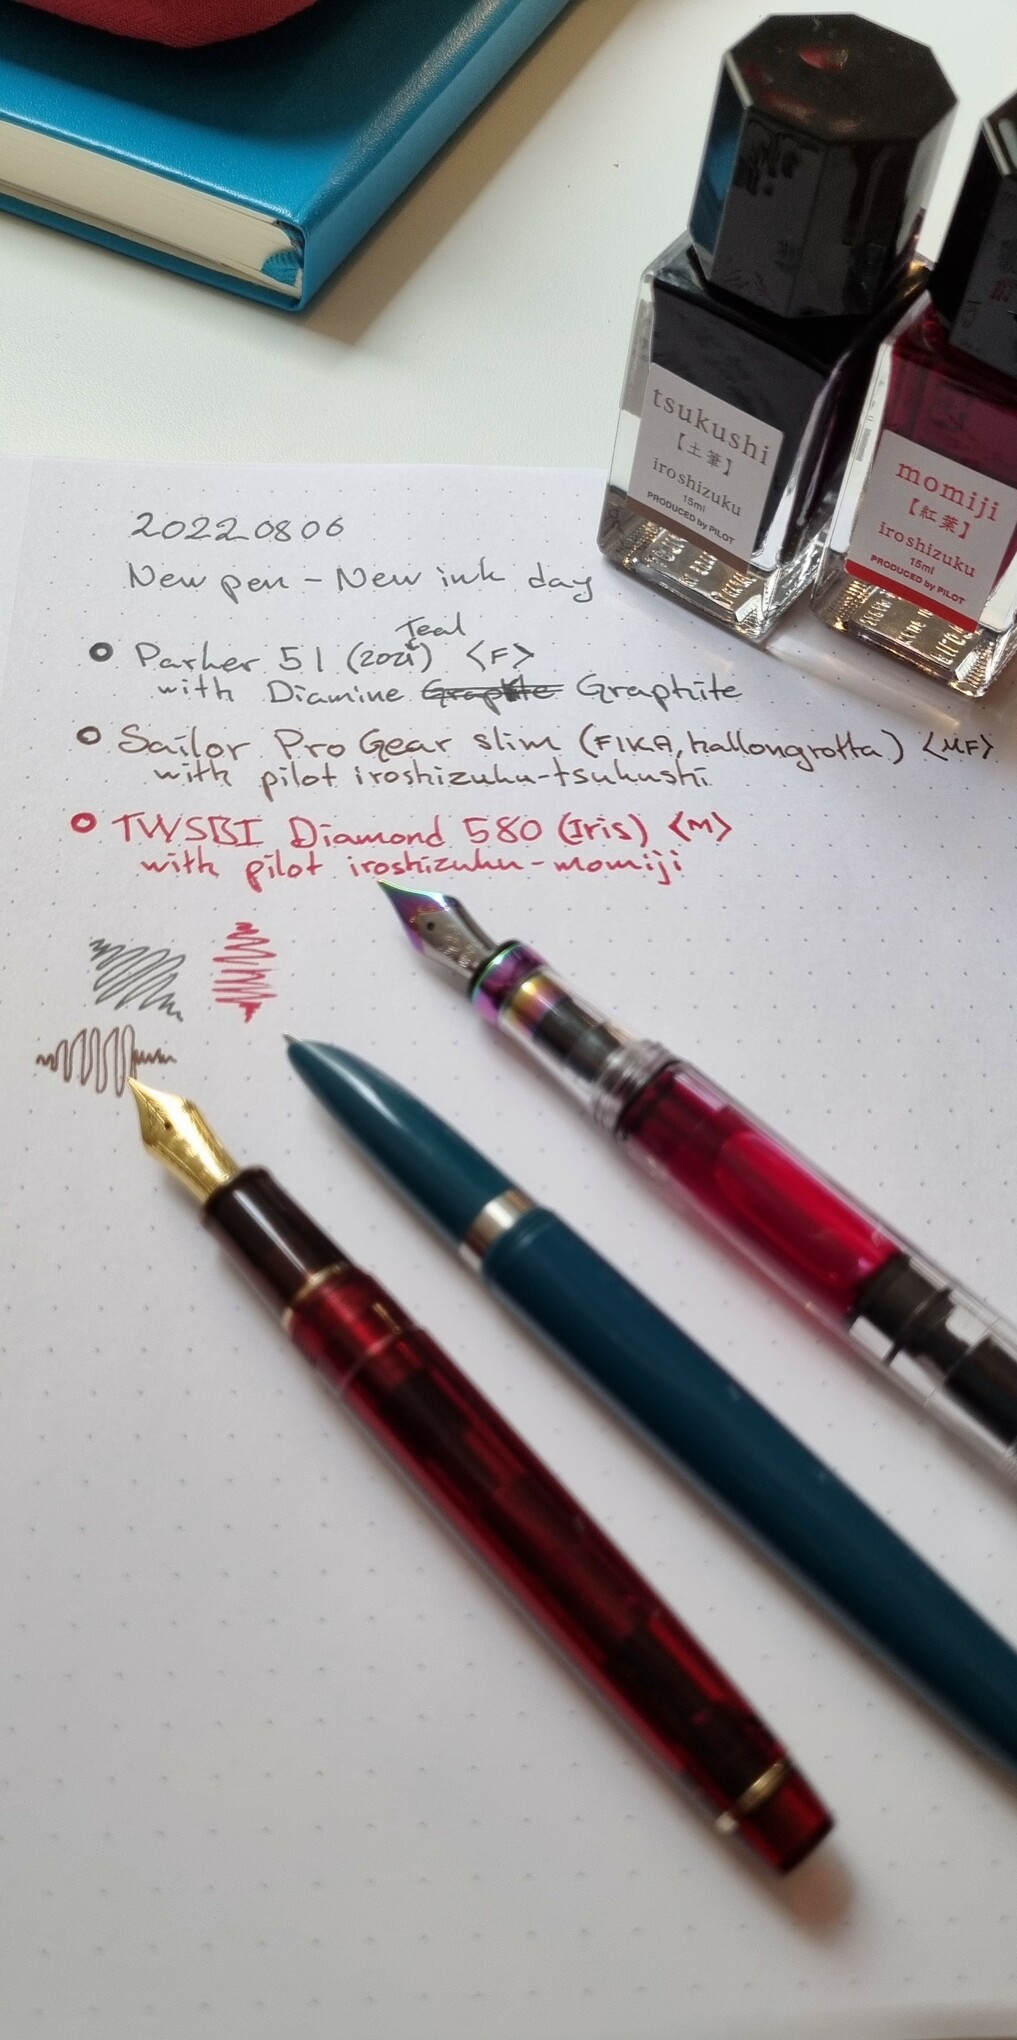 Three pens layed out on a paper with text by the fespective pens
"20220806
New pen - new ink day
○ Parker 51 (2021 Teal) <F>
     with Diamine Graphite
○ Sailor Pro Gear Slim (FIKA, hallongrotta) <MF>
     with Pilot iroshizuku - tsukushi
○ TWSBI Diamond 580 (Iris) <M>
     with Pilot irushizuku - momiji "